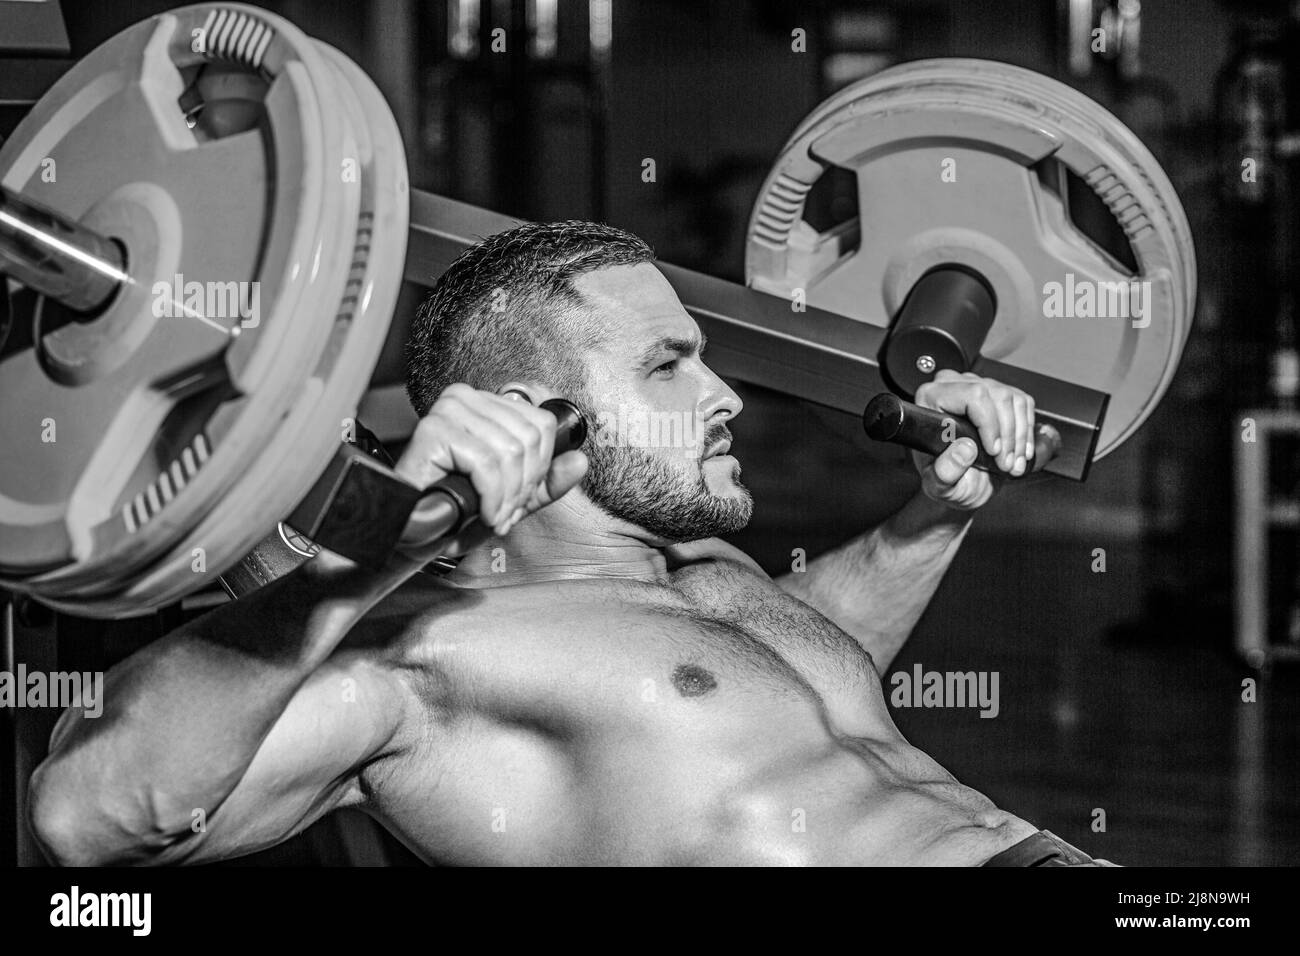 Muscular man workout with barbell at gym. Bodybuilder athletic man with six pack, perfect abs, shoulders, biceps, triceps, chest. Barbells workout Stock Photo